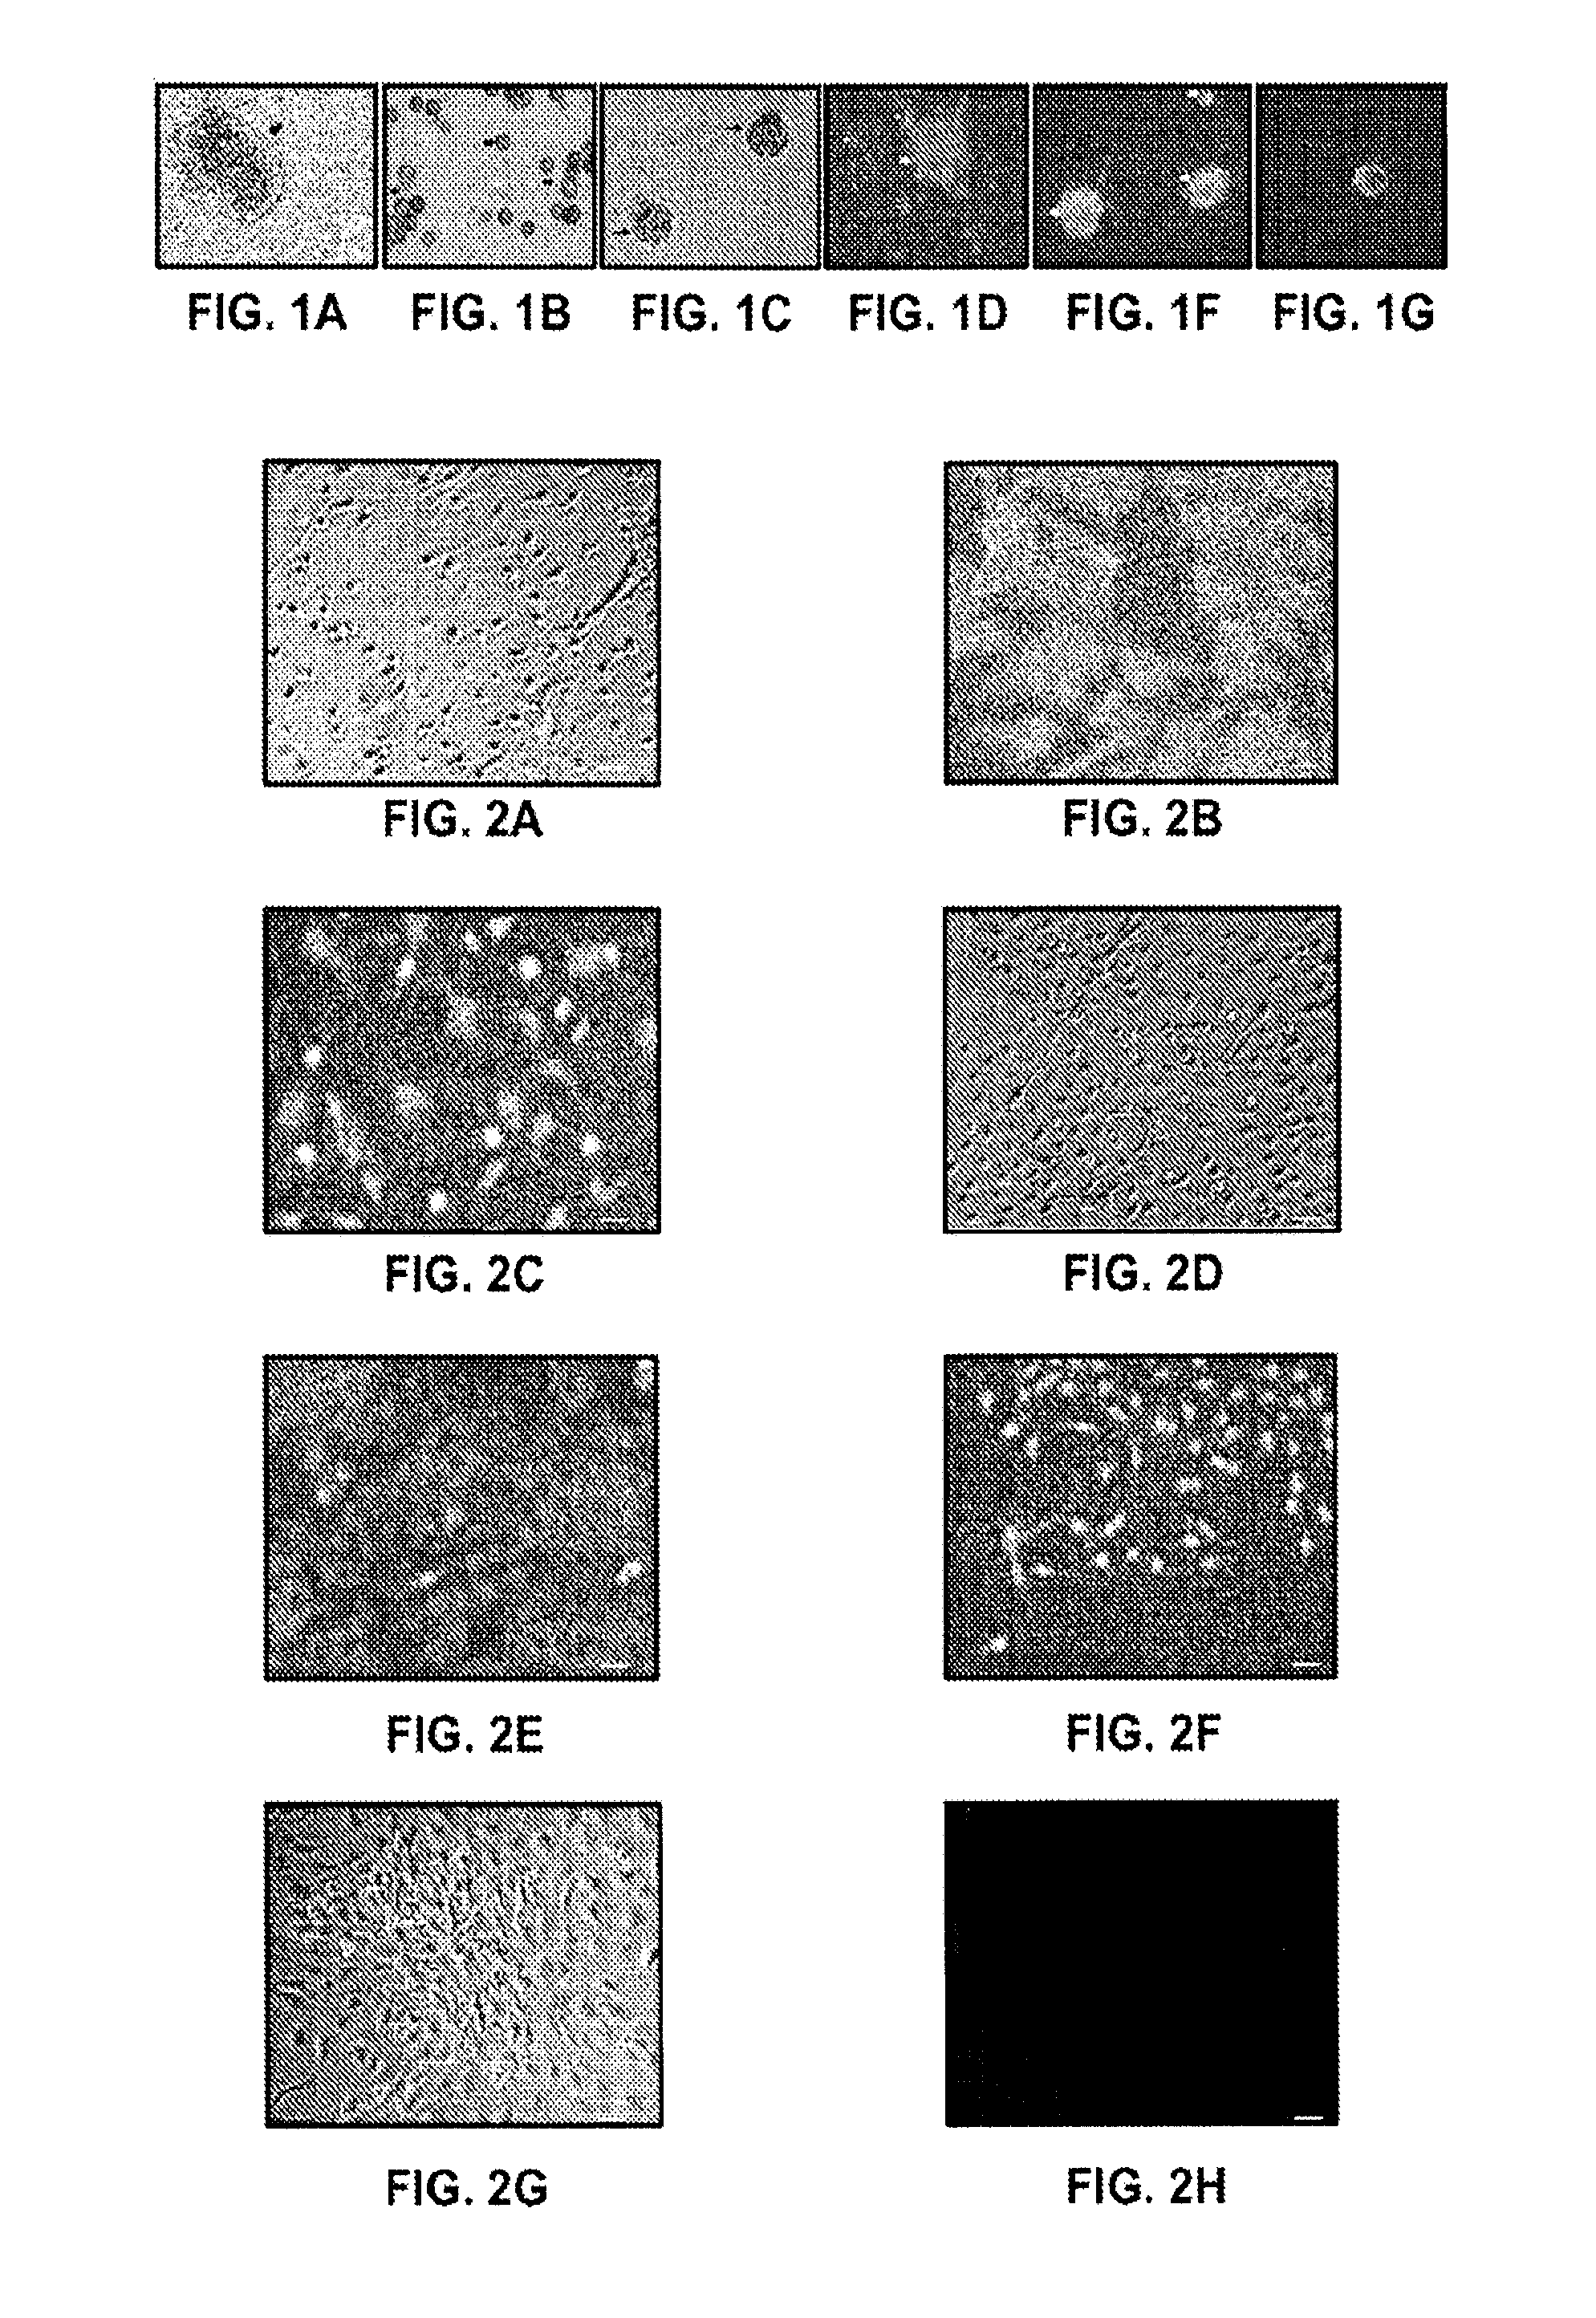 Endorphin Therapy Compositions and Methods of Use Thereof